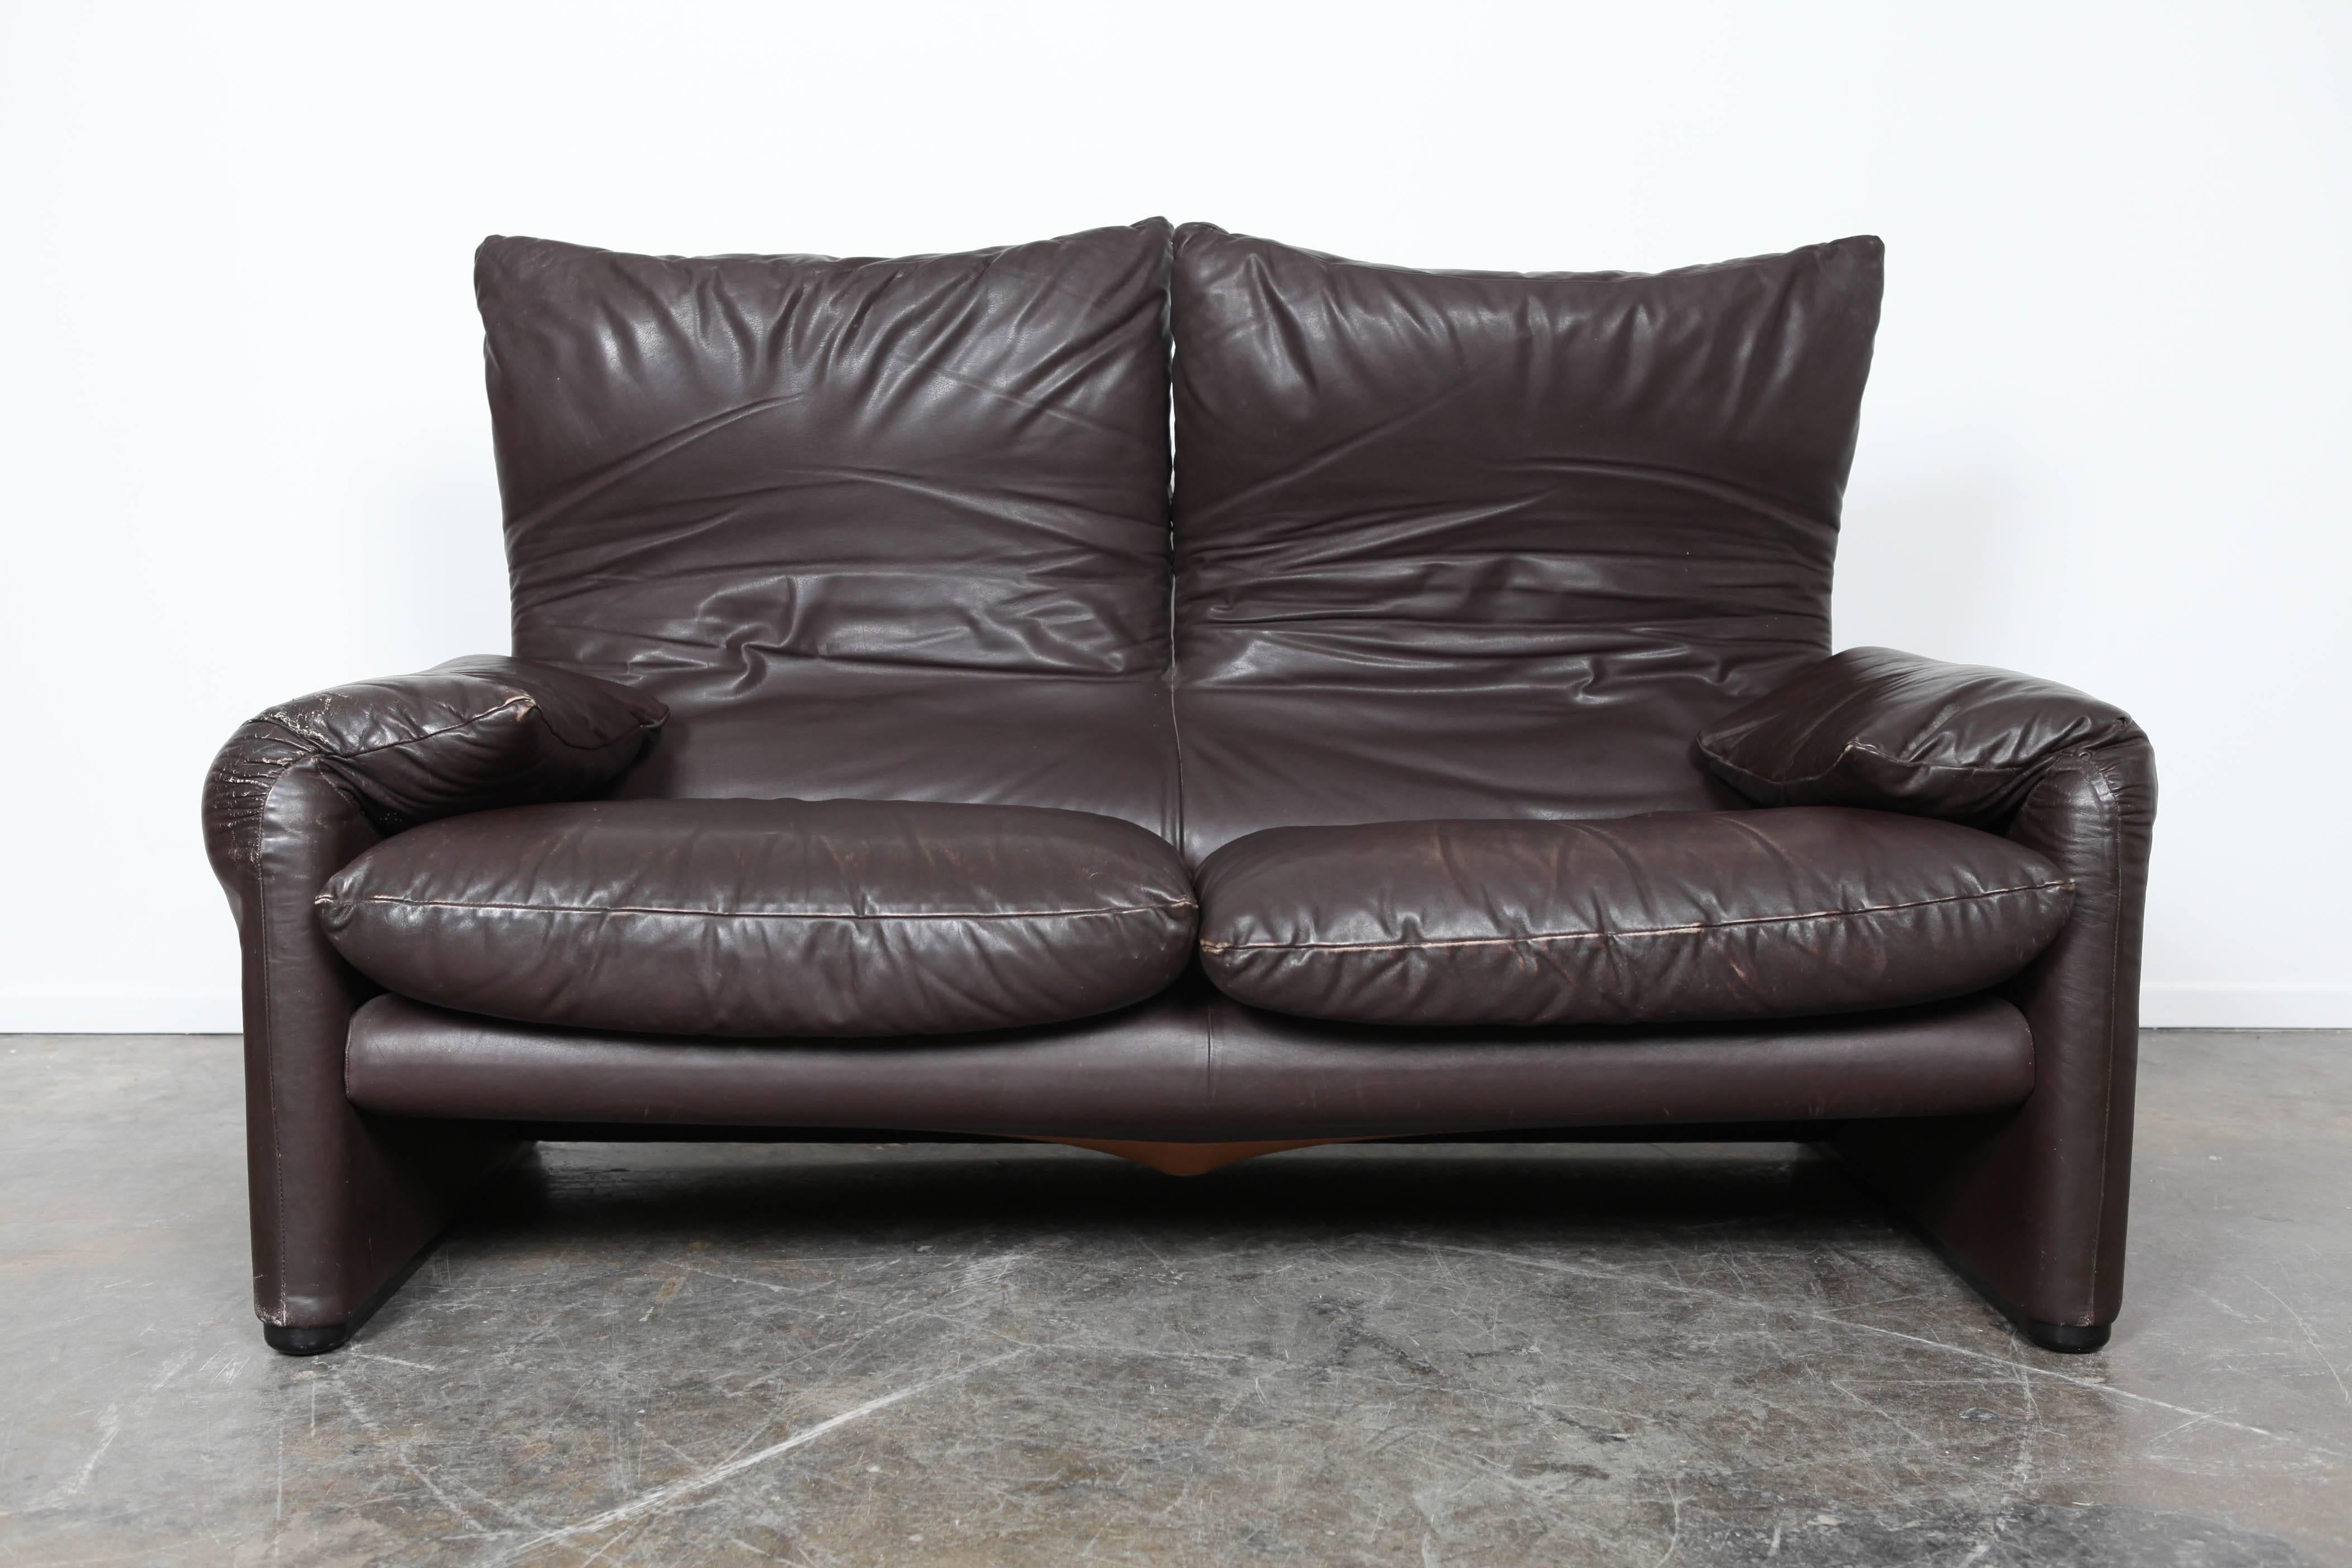 Espresso brown leather two-seat 